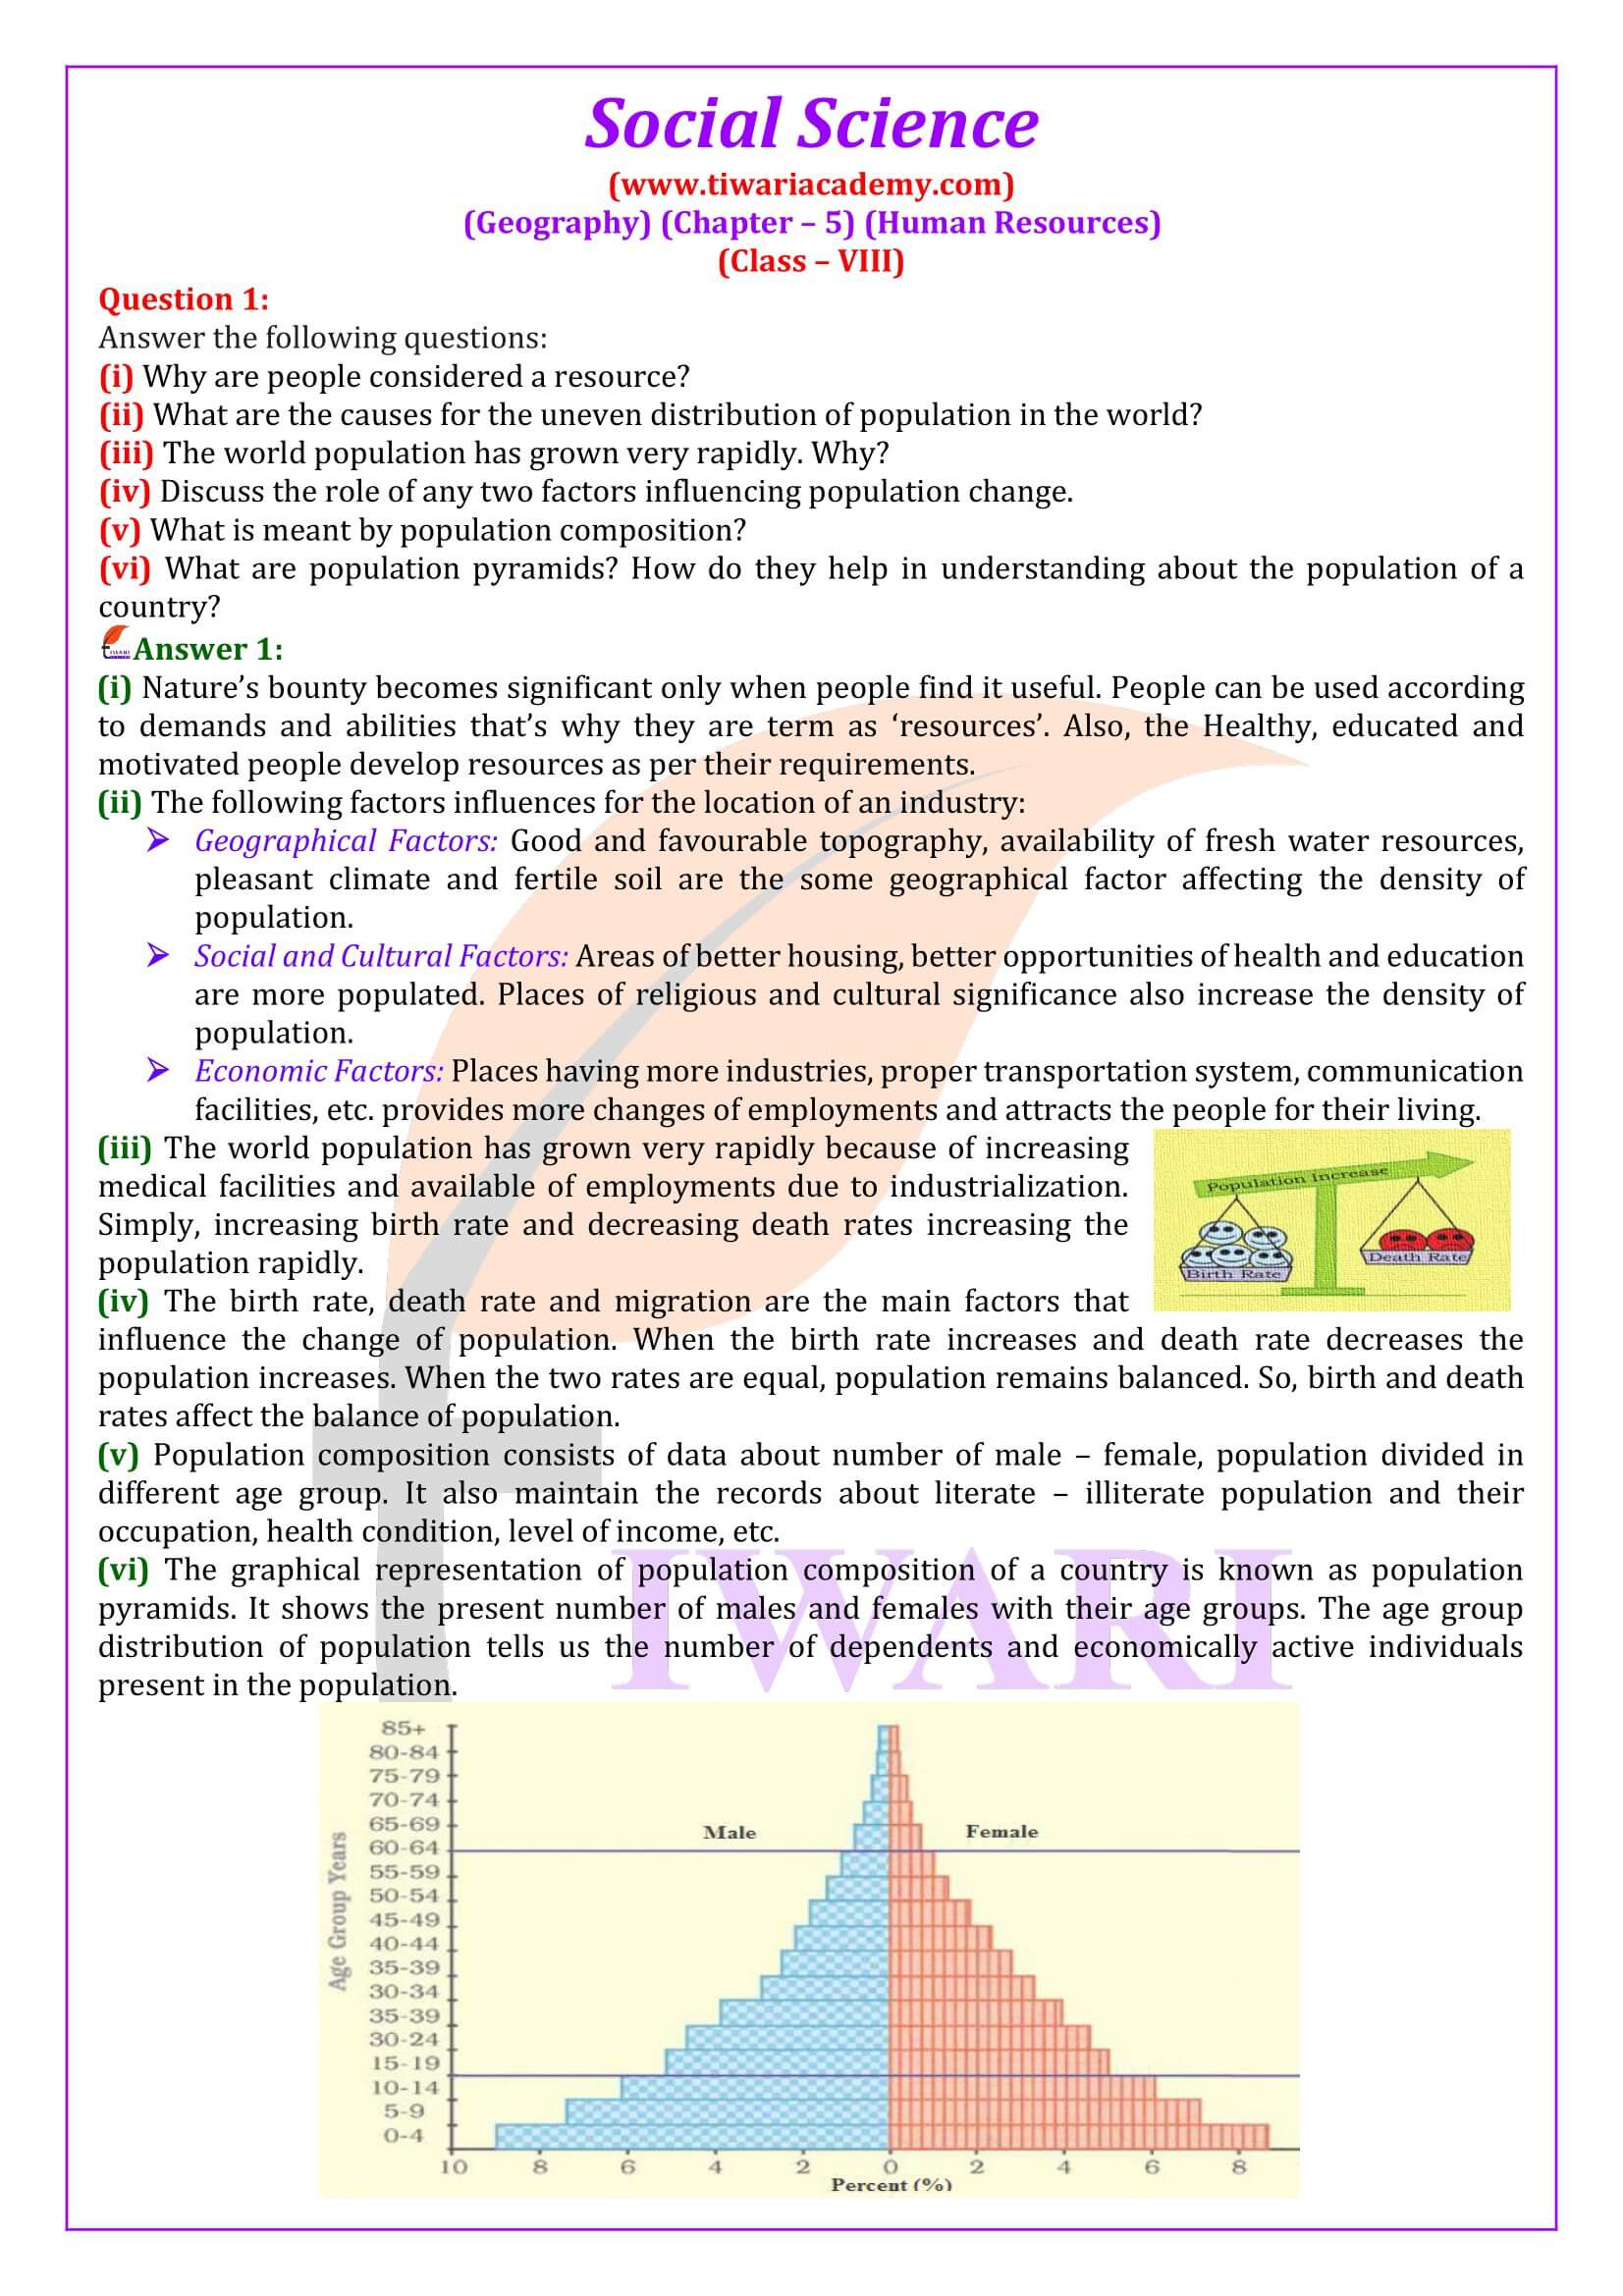 NCERT Solutions for Class 8 Social Science Geography Chapter 5 Human Resources